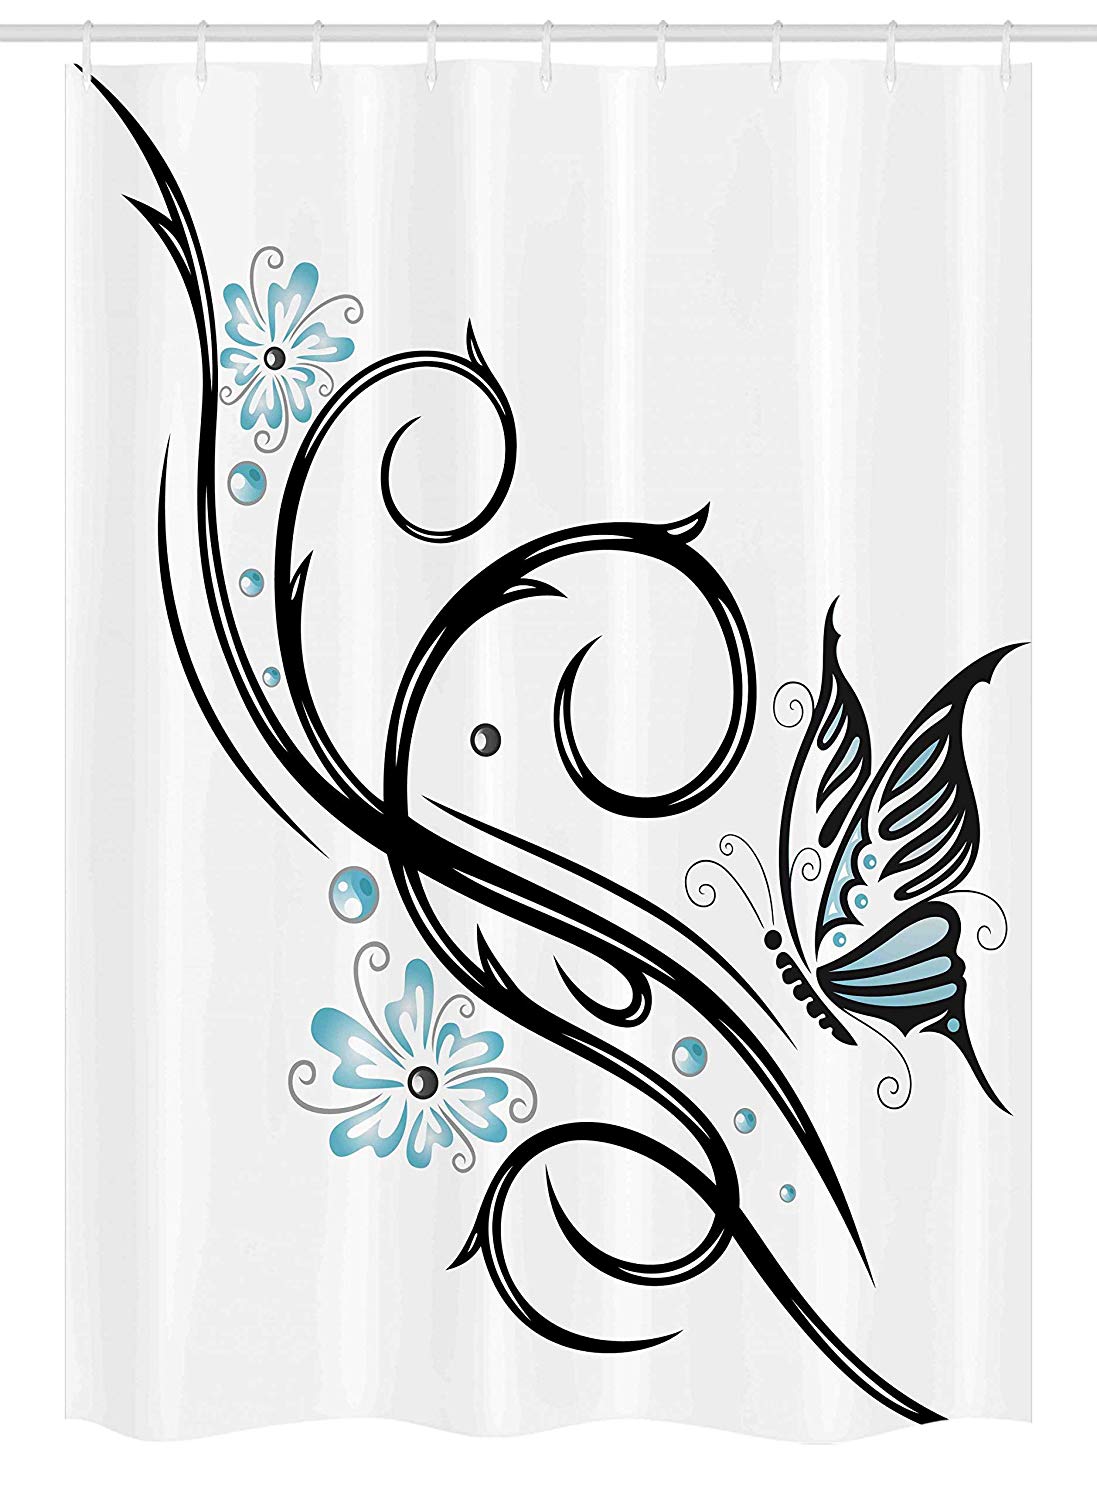 Ambesonne Tattoo Stall Shower Curtain, Leaf Like Design with Blue Flowers and a Flying Butterfly Image Print, Fabric Bathroom Decor Set with Hooks, 54" X 78", Blue Black